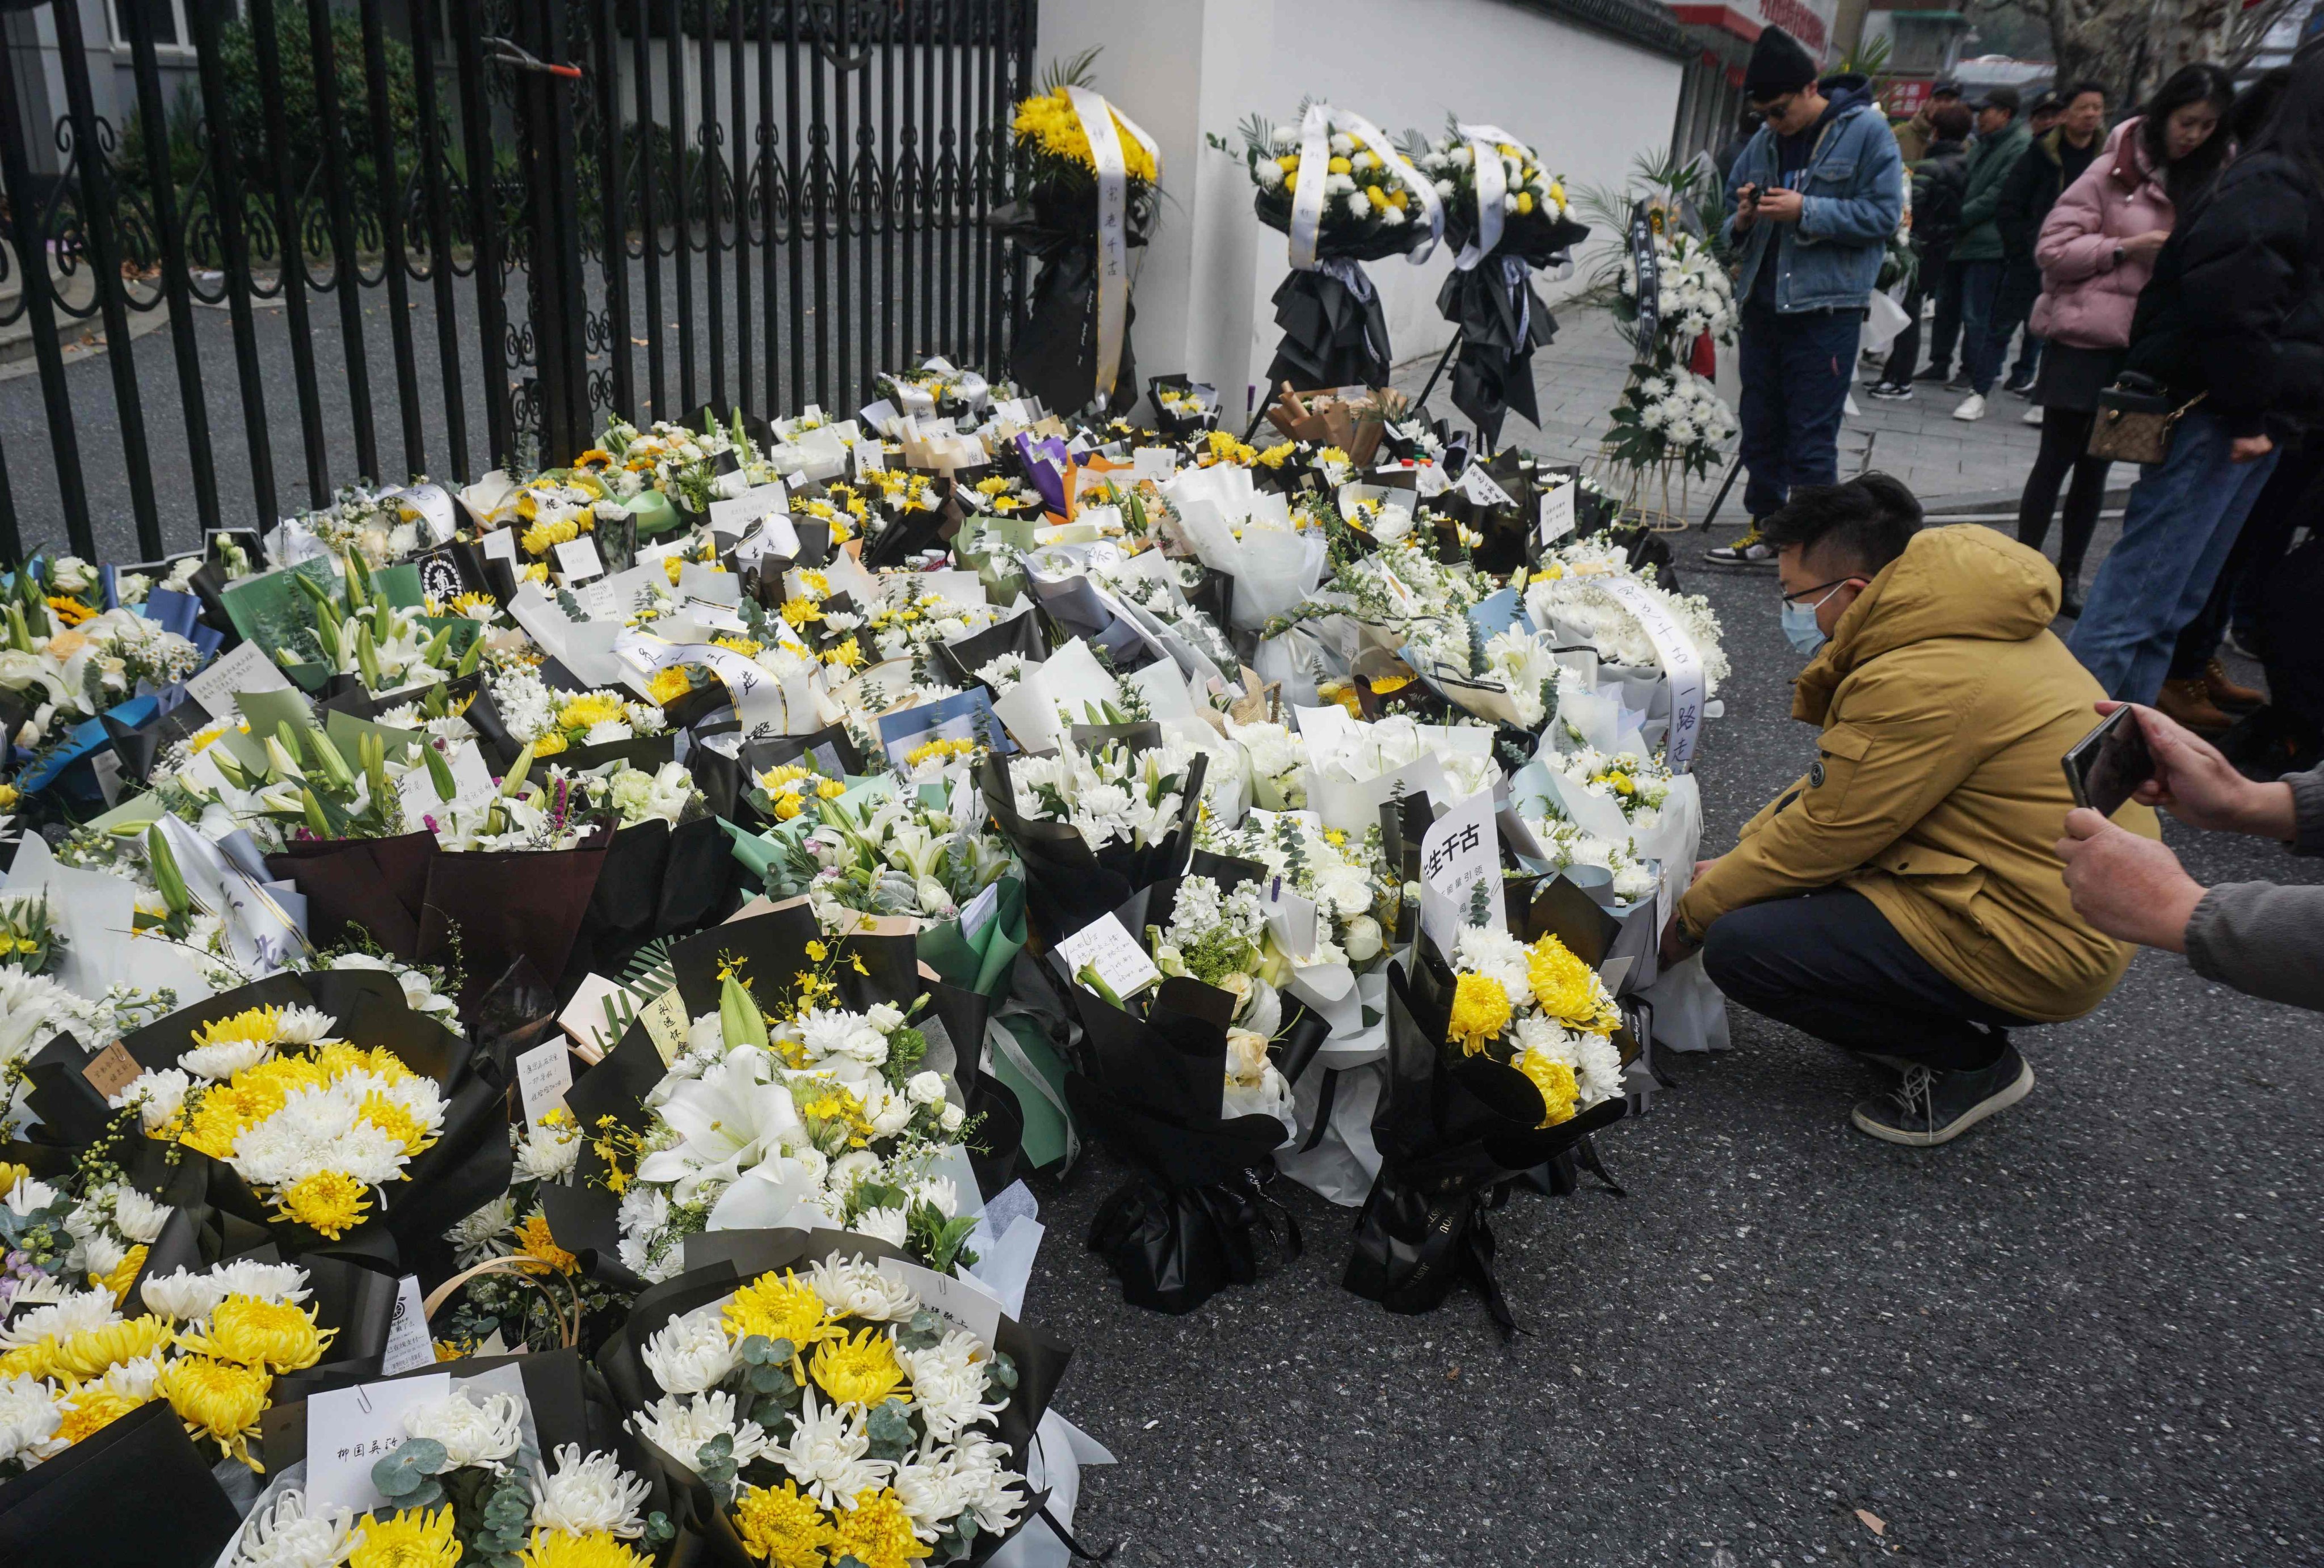 People pay their respects and place bouquets outside the headquarters of Wahaha following the death of its founder Zong Qinghou, in Hangzhou in eastern China’s Zhejiang province on February 26. Photo: AFP